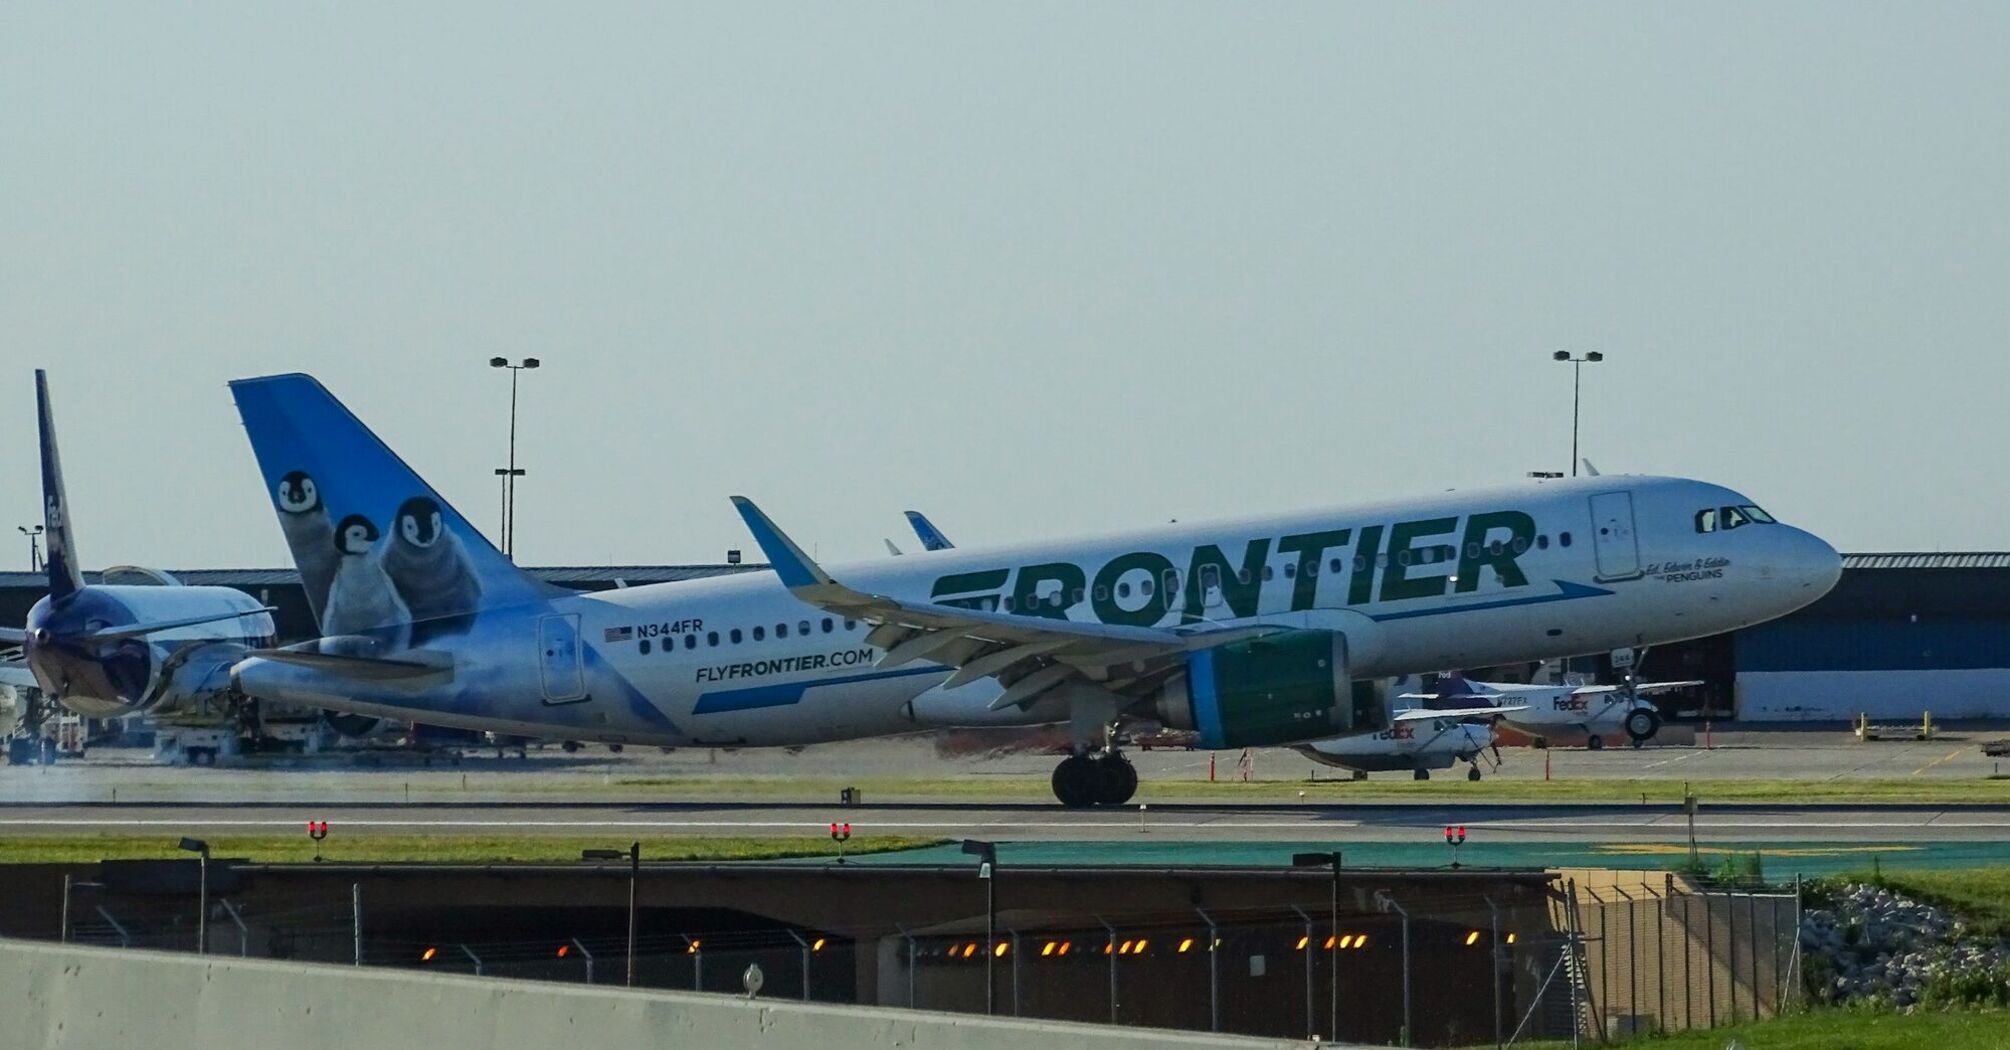 Frontier Airlines plane with penguin tail design on runway